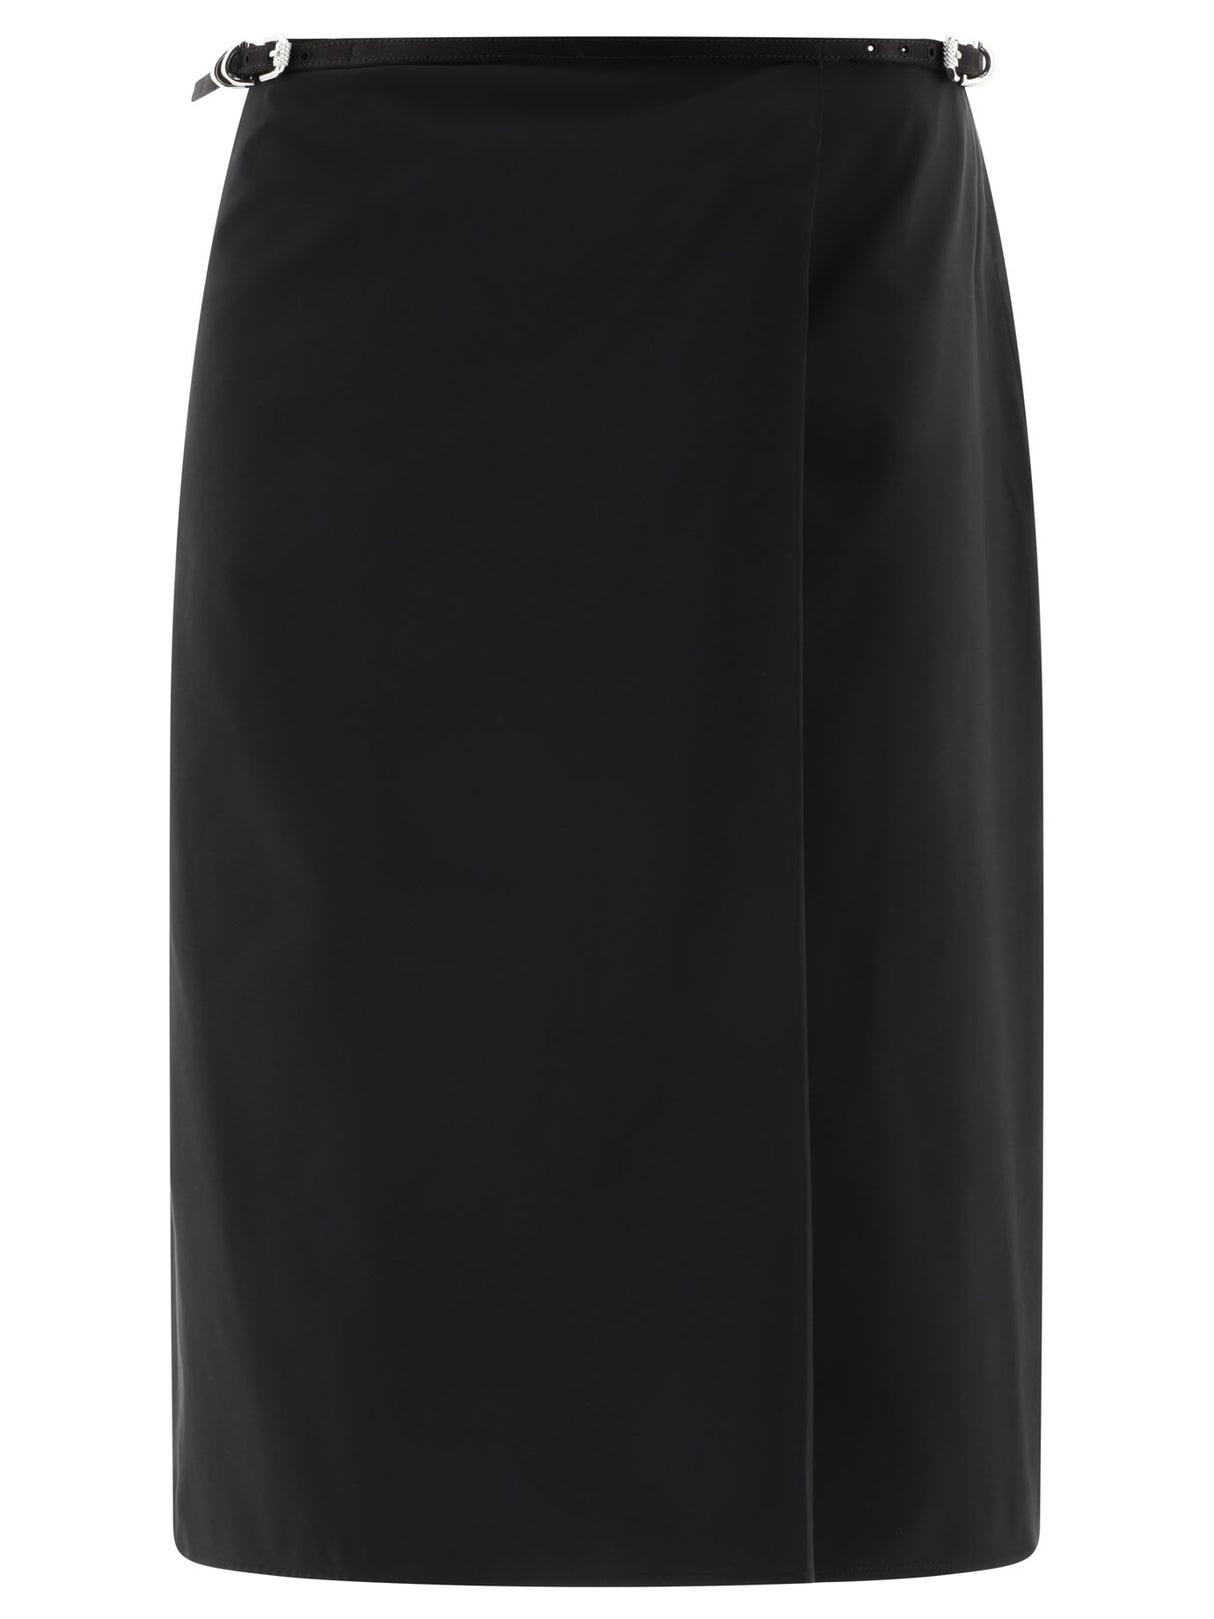 GIVENCHY Versatile and Chic Wrap Skirt for Women